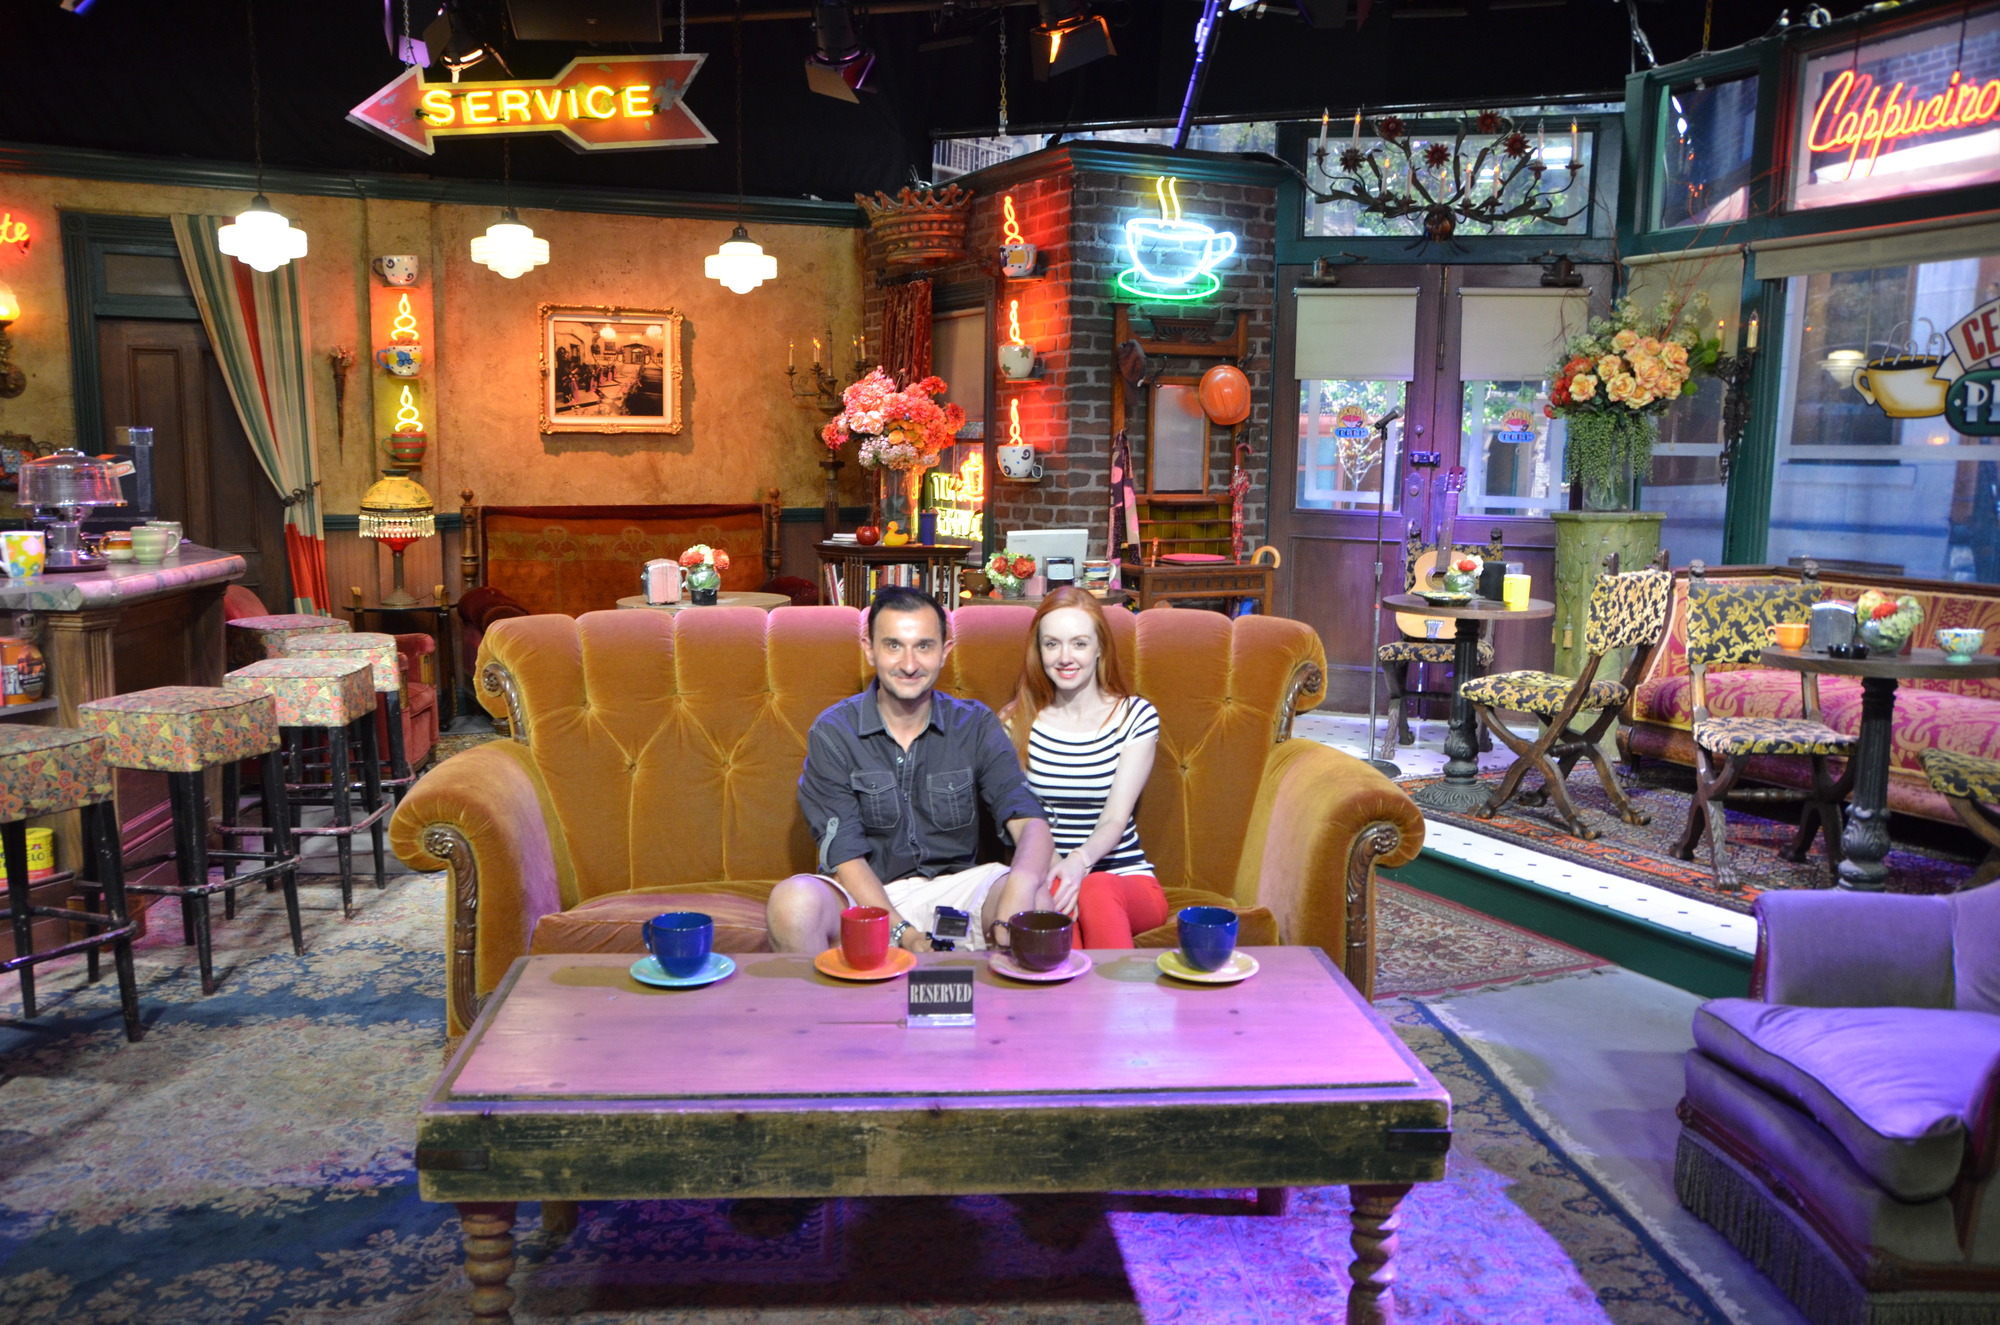 Sitting on the 'Friends' couch as part of the Warner Bros studio tour, LA.